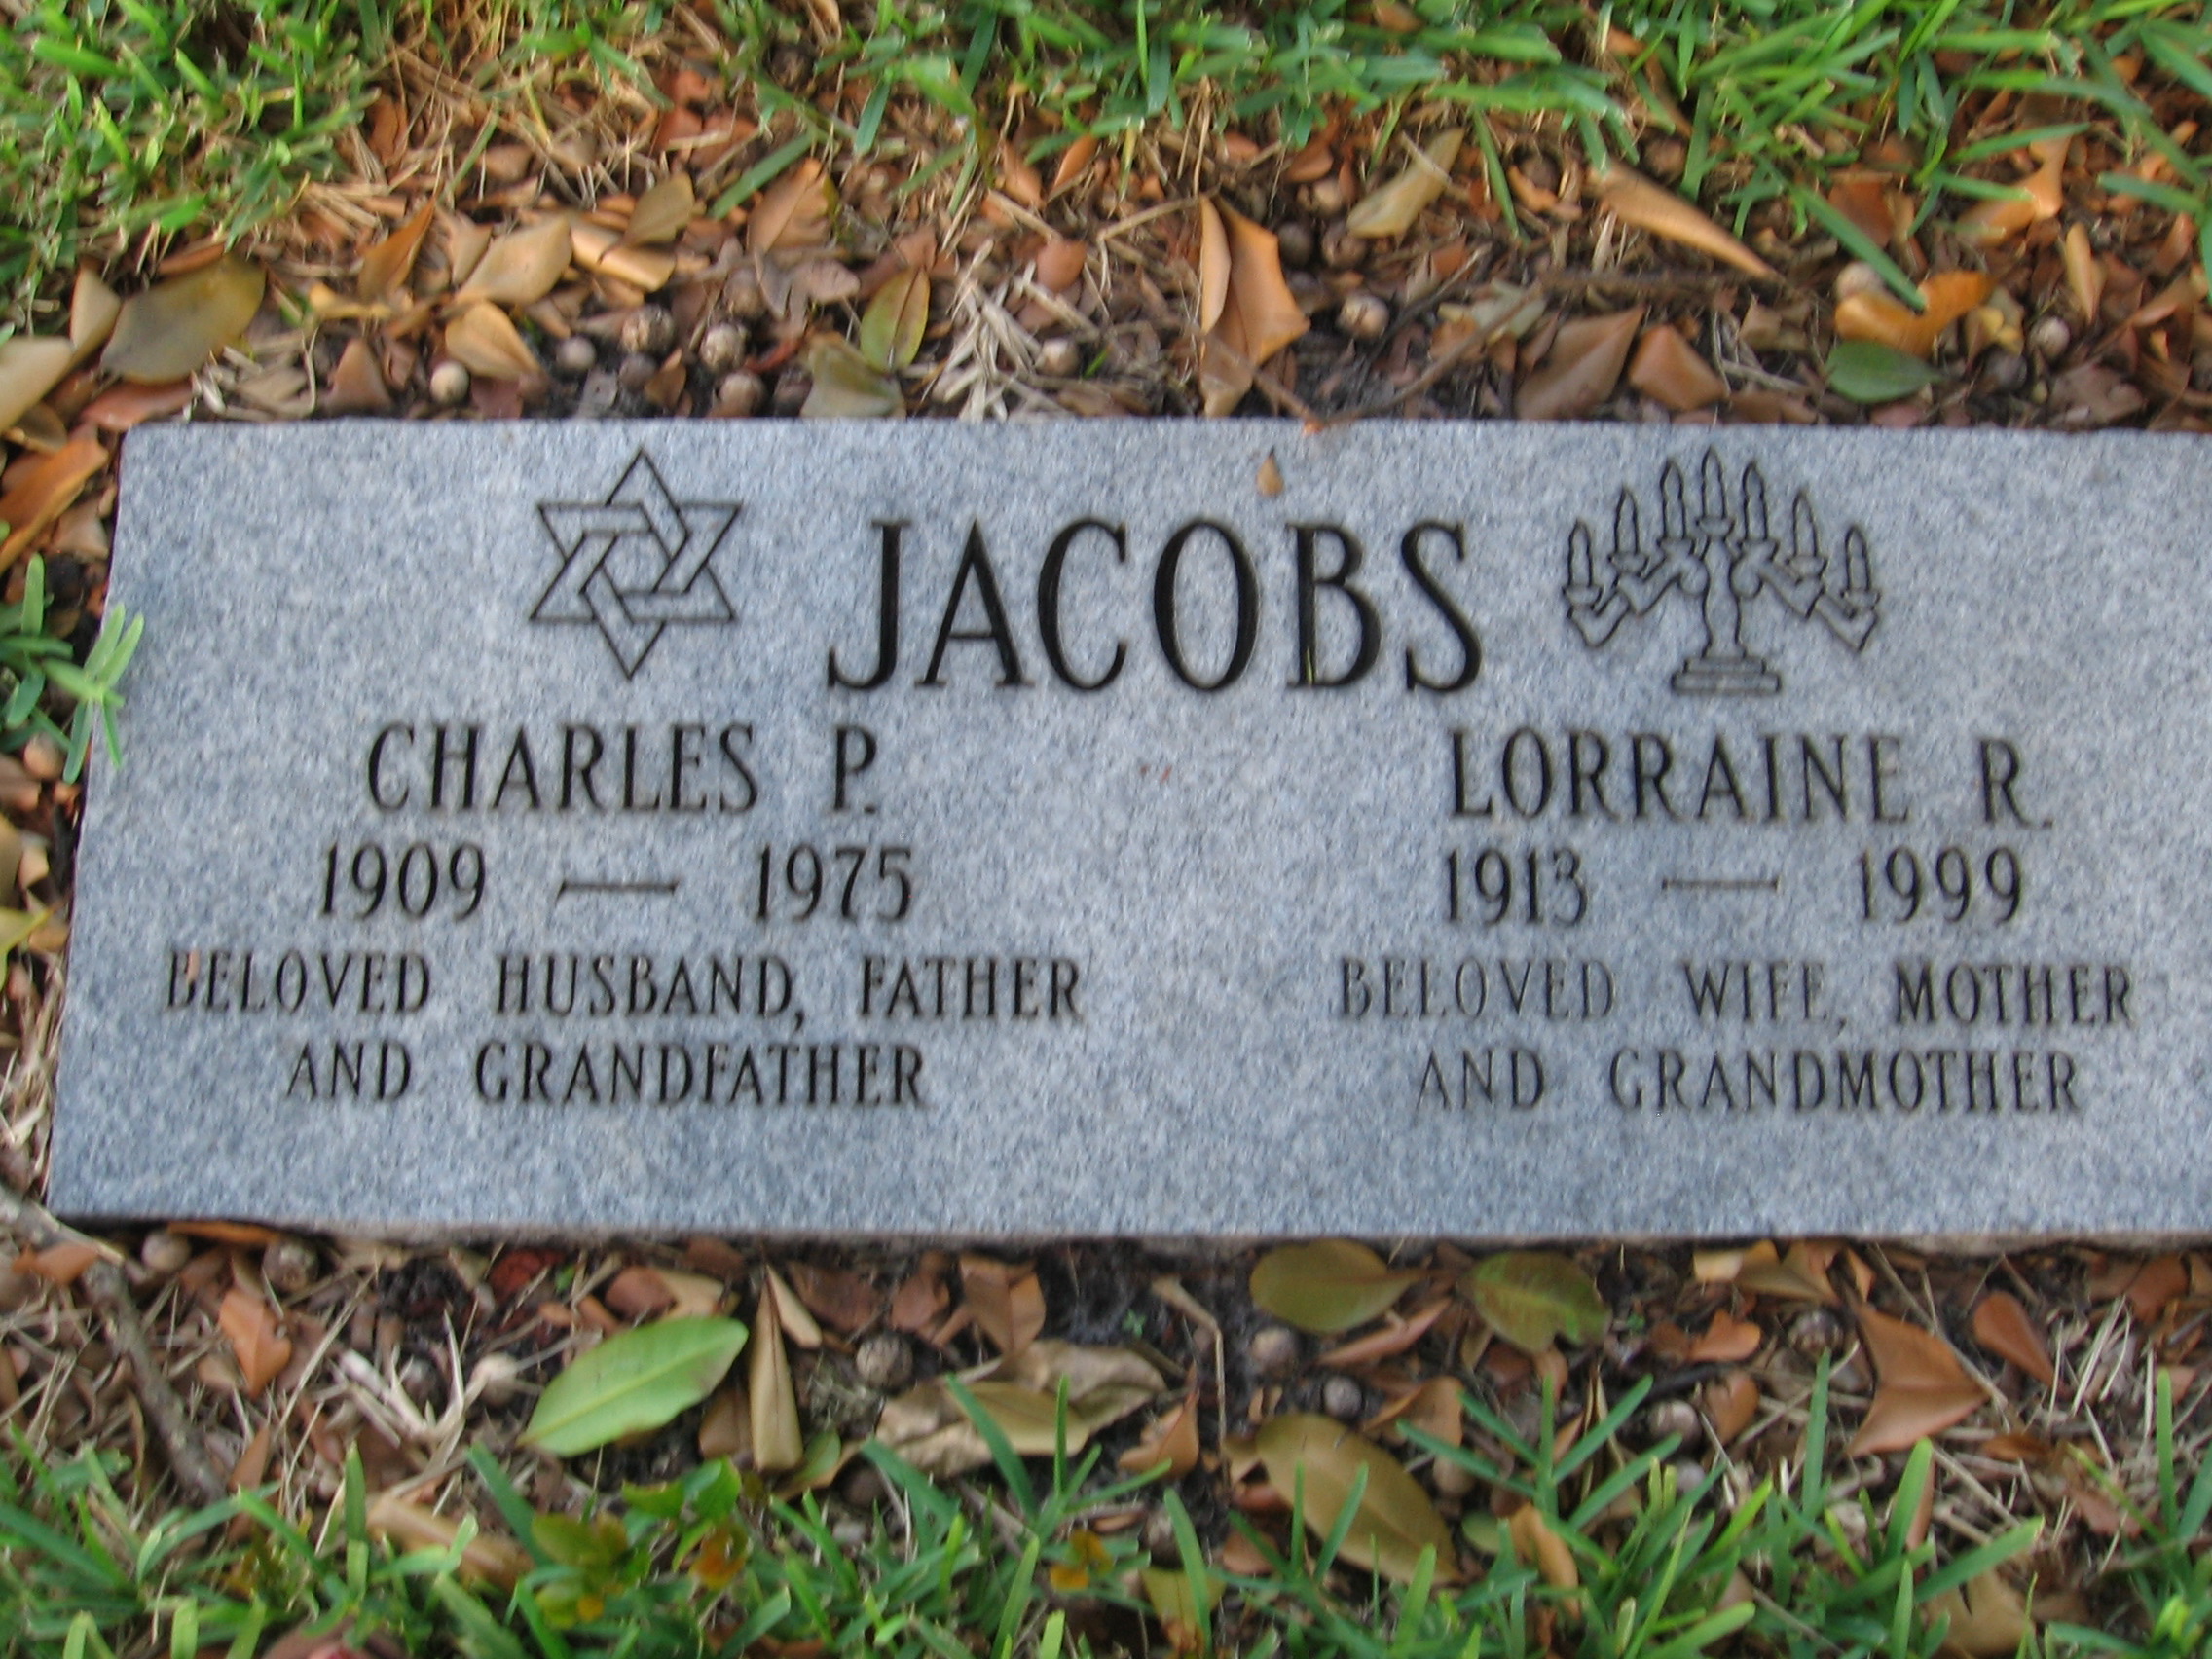 Charles P Jacobs